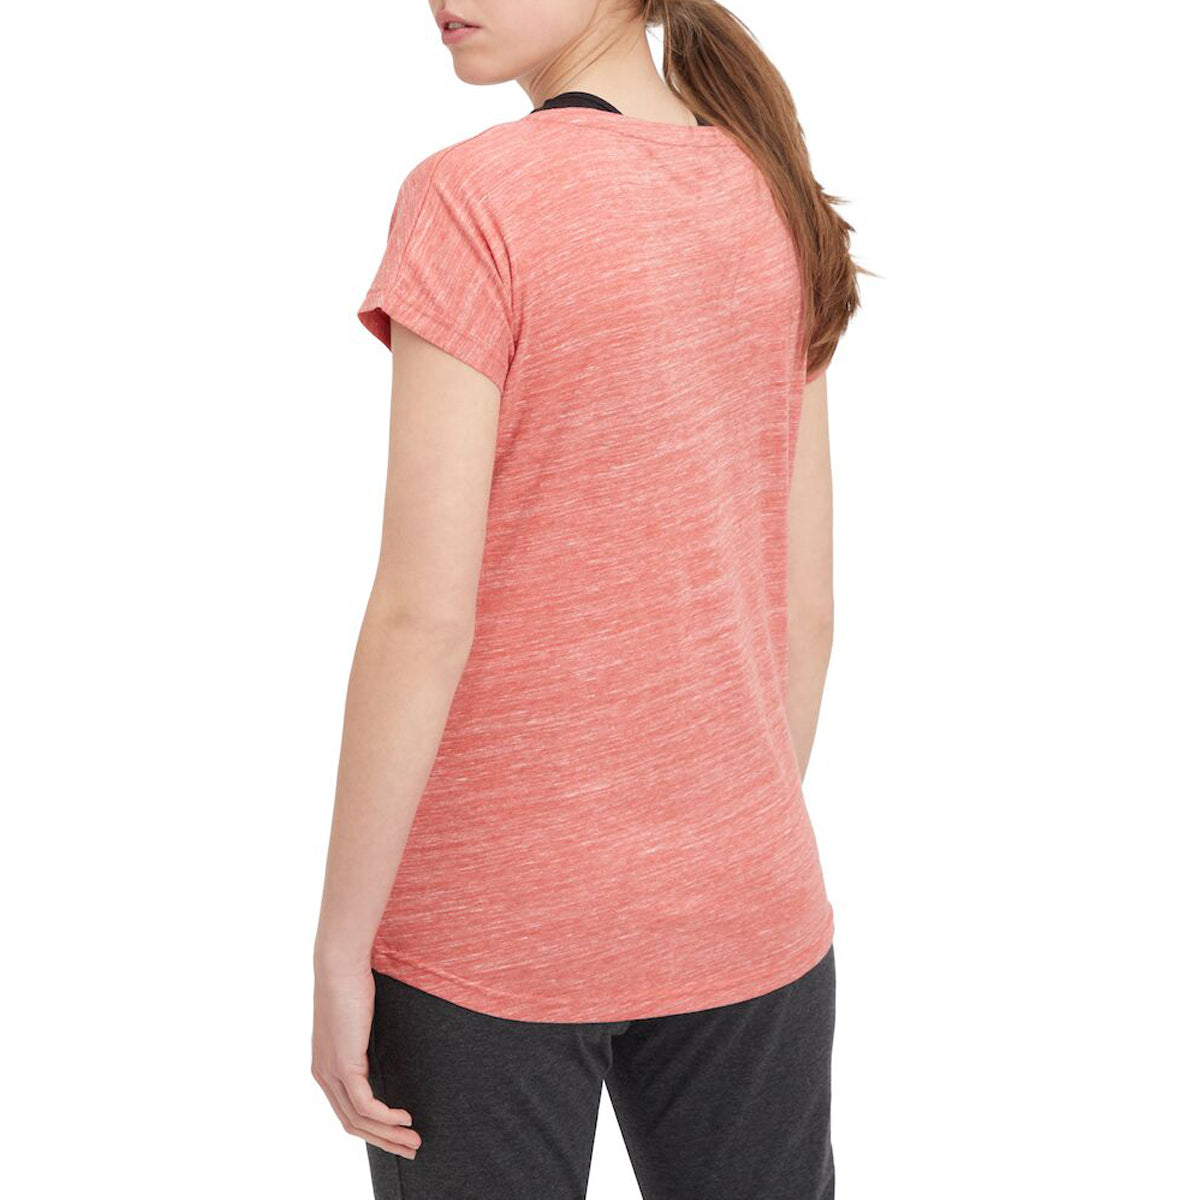 Energetics Cully Lifestyle T-Shirt For Women, Pink